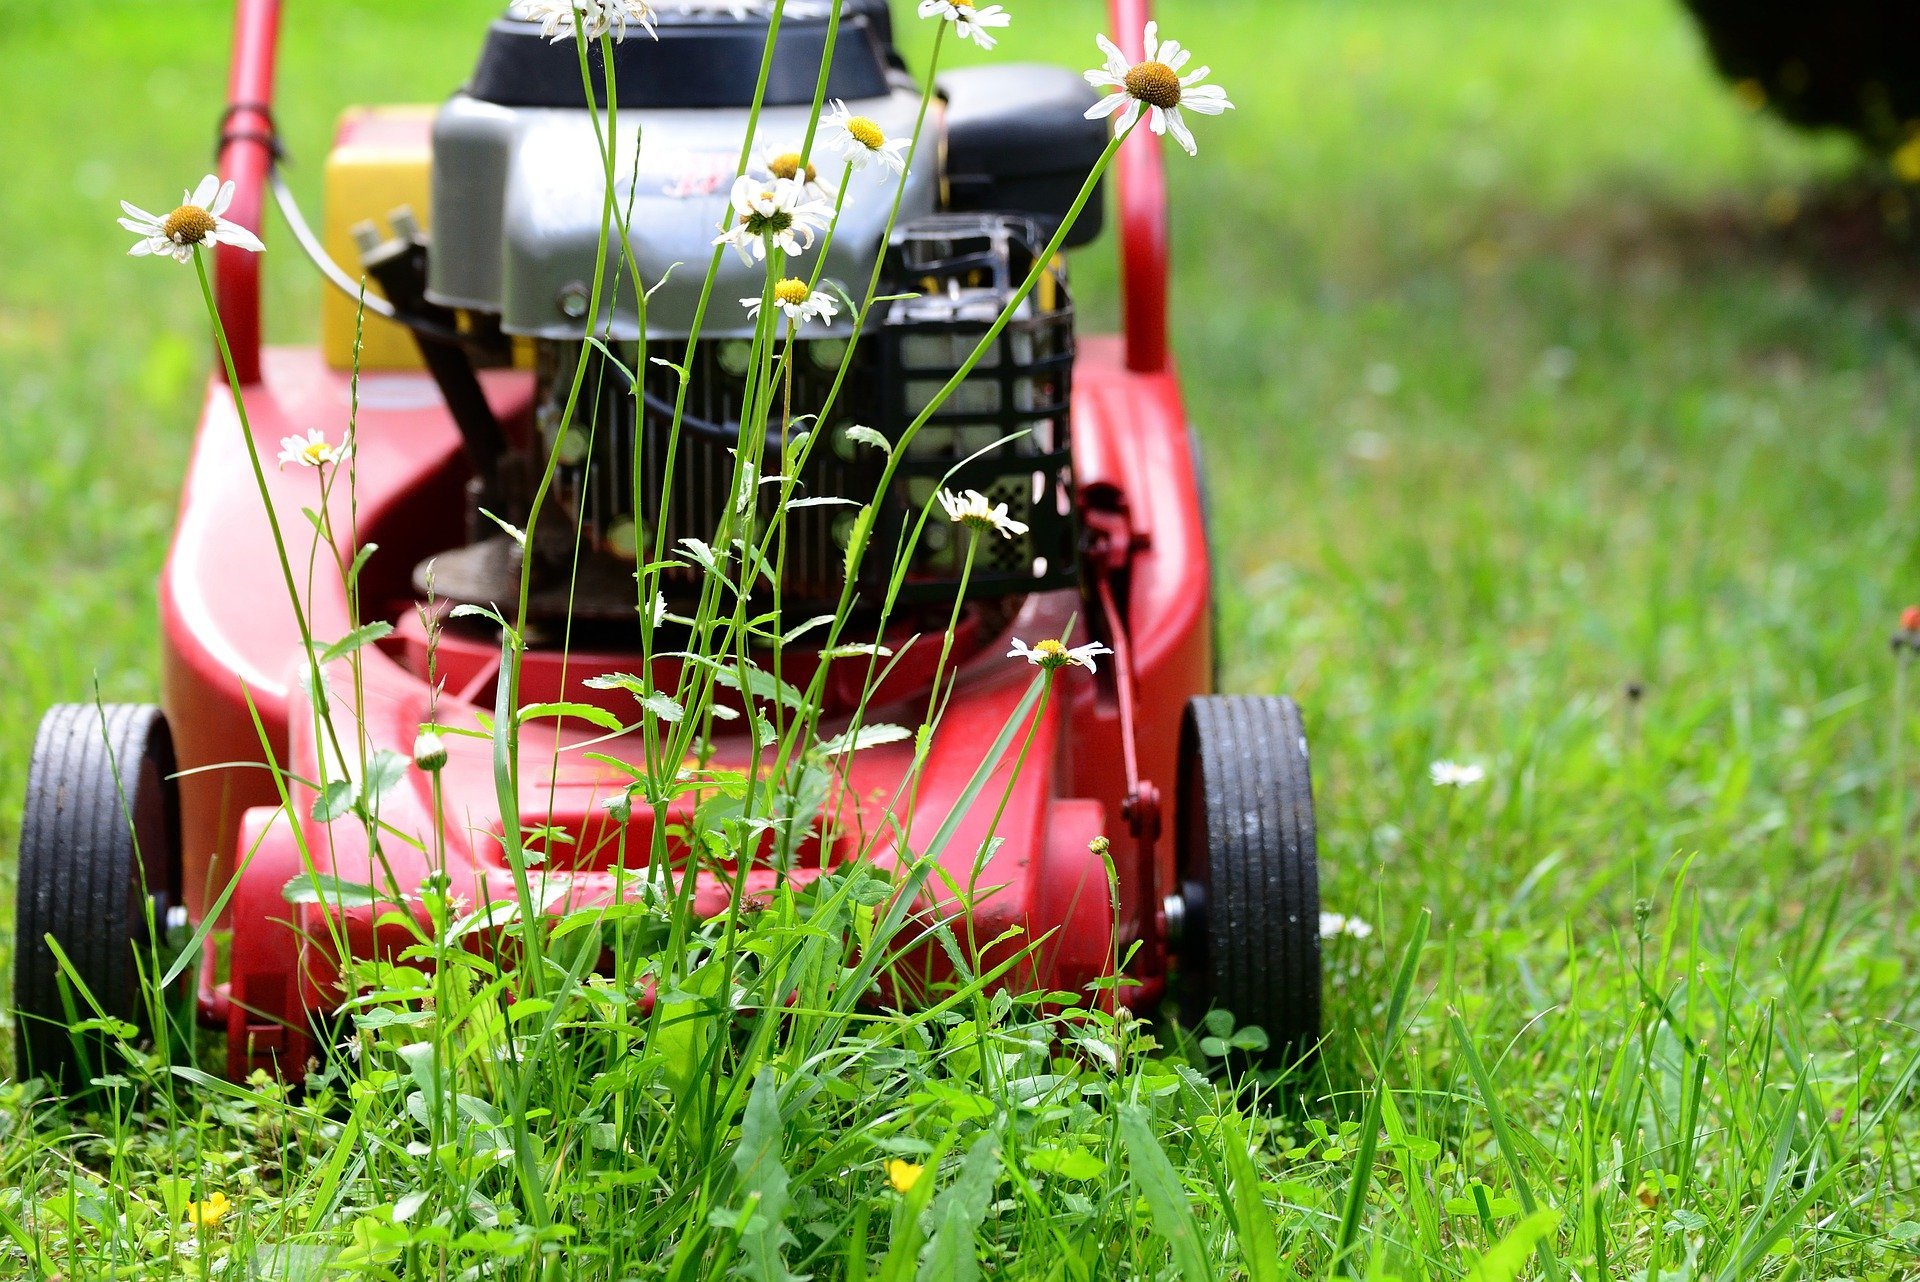 Glasgow SNP accused of 'callous cut' in grass cutting services Glasgow SNP accused of 'callous cut' in grass cutting services used by 13,000 vulnerable households